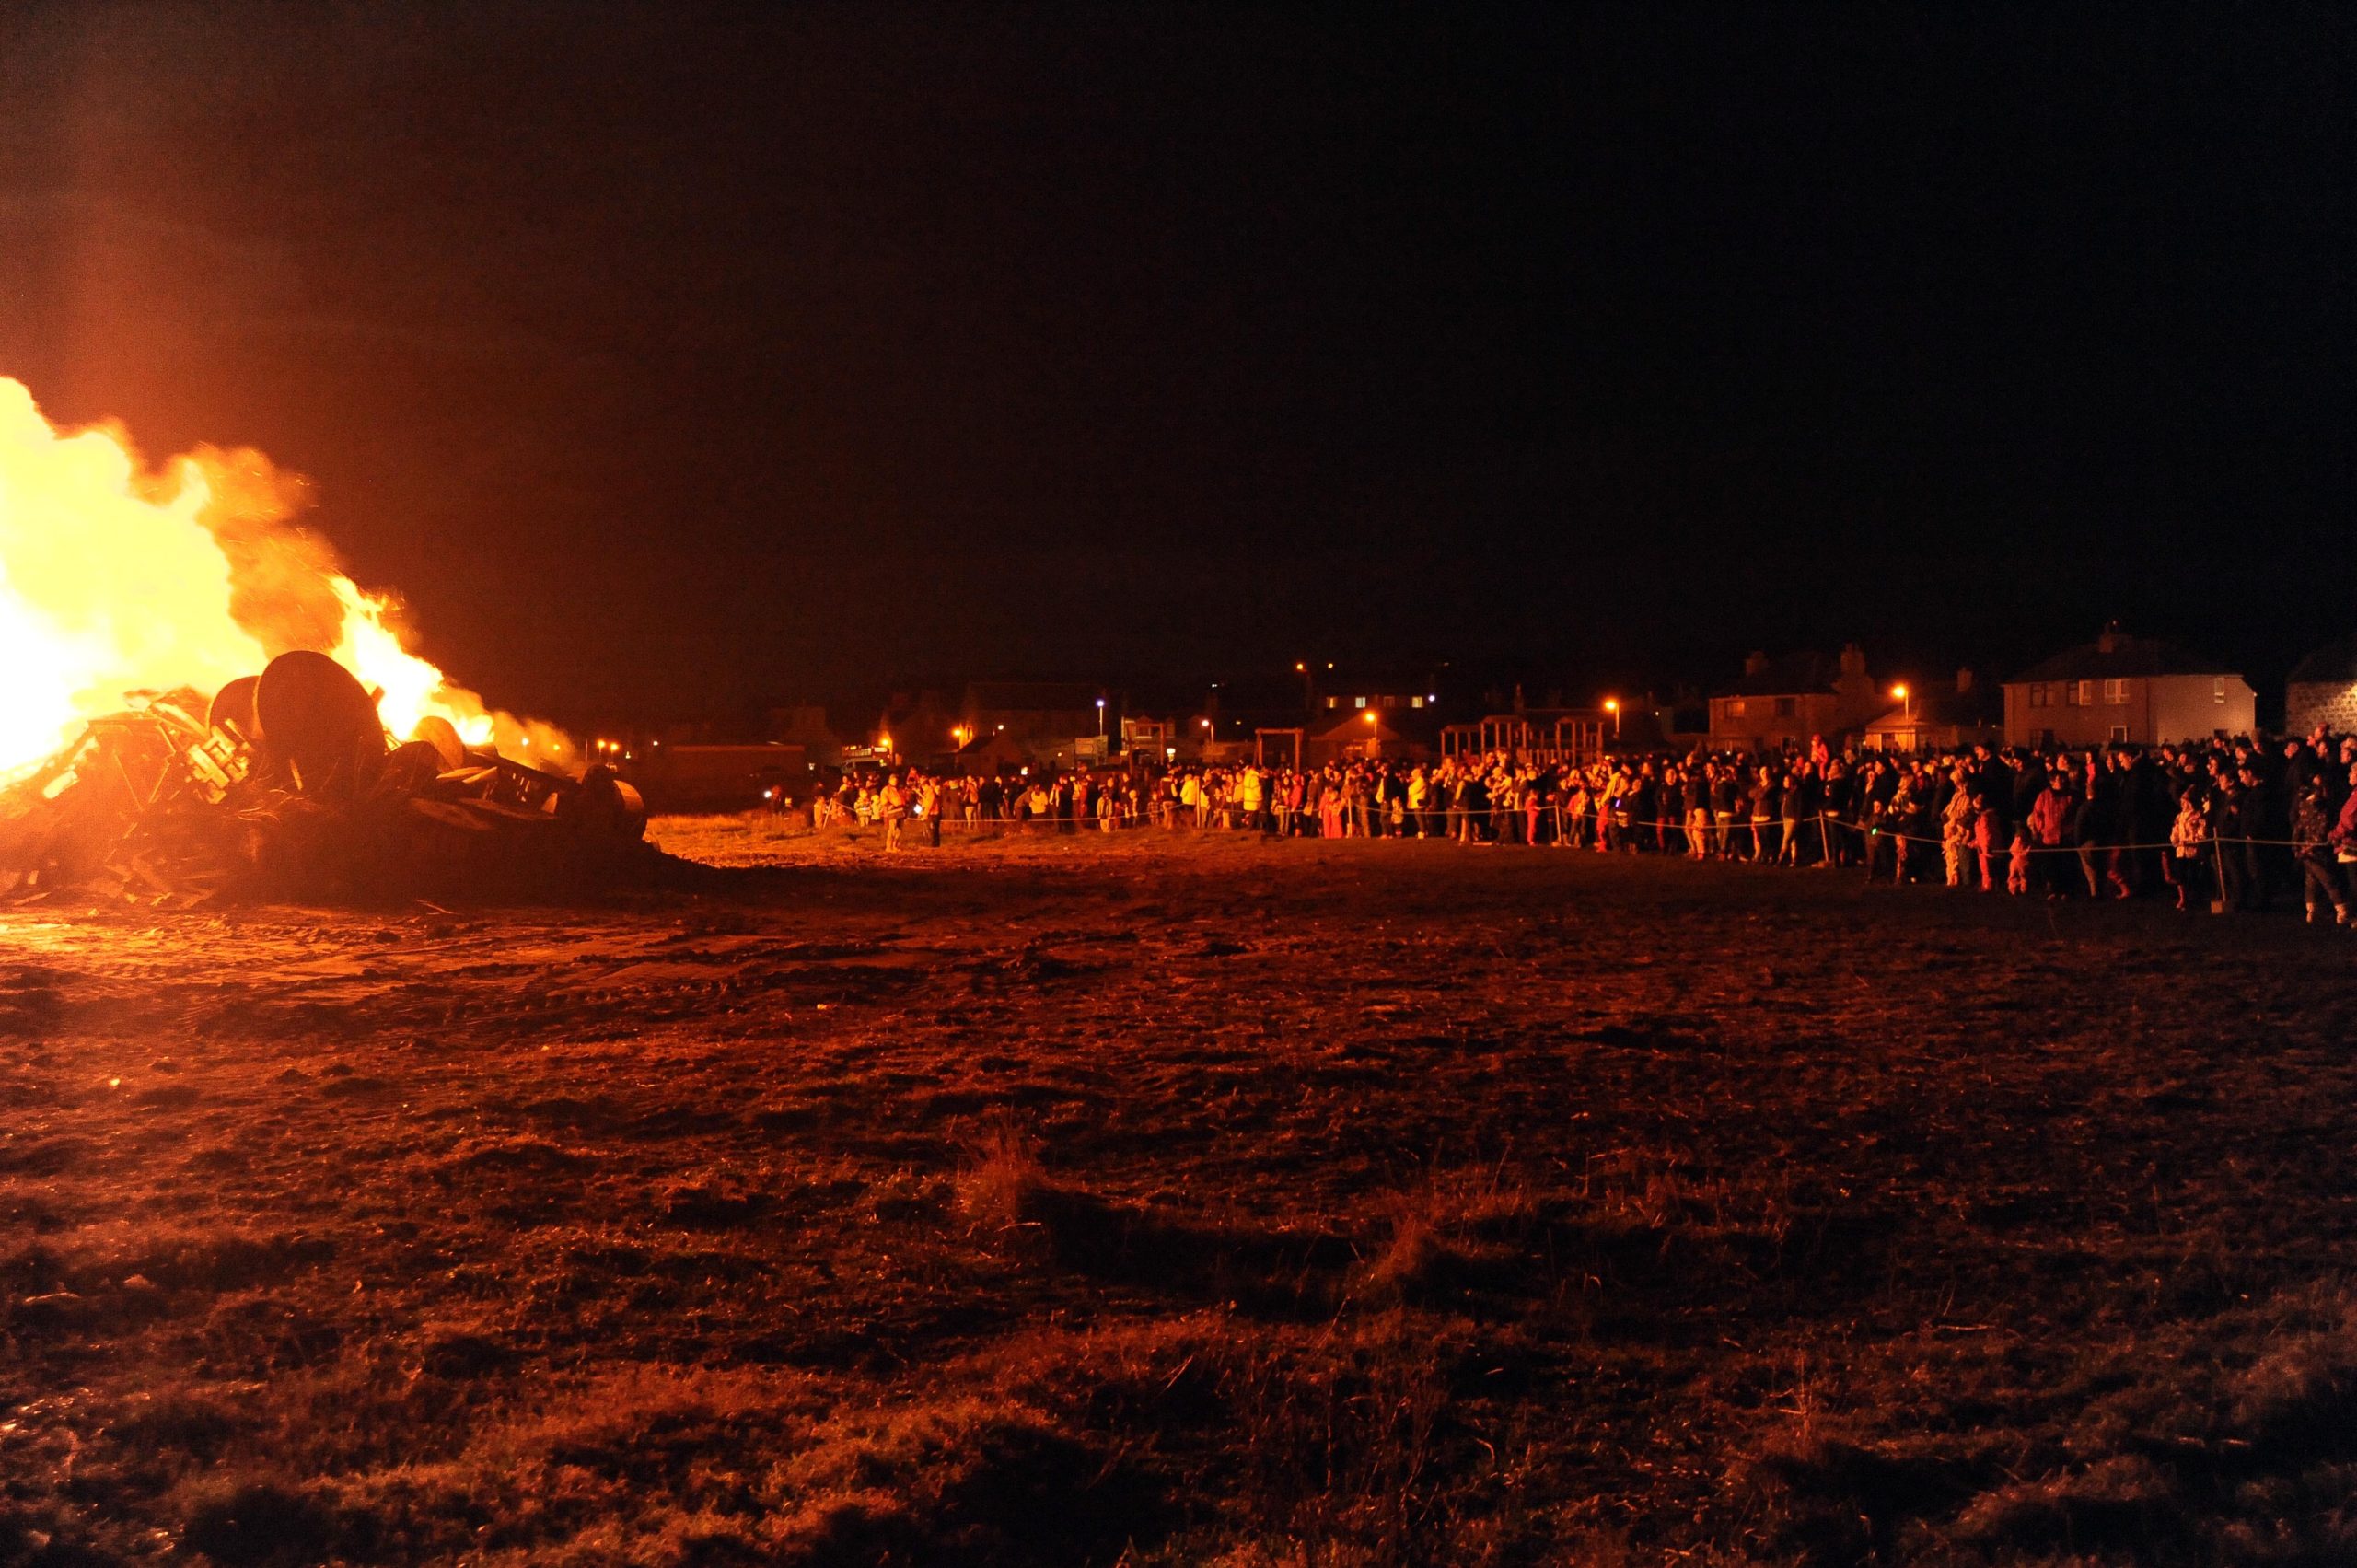 LARGE CROWDS AT THE ROSEHEARTY BONFIRE.(KING/BROWN)